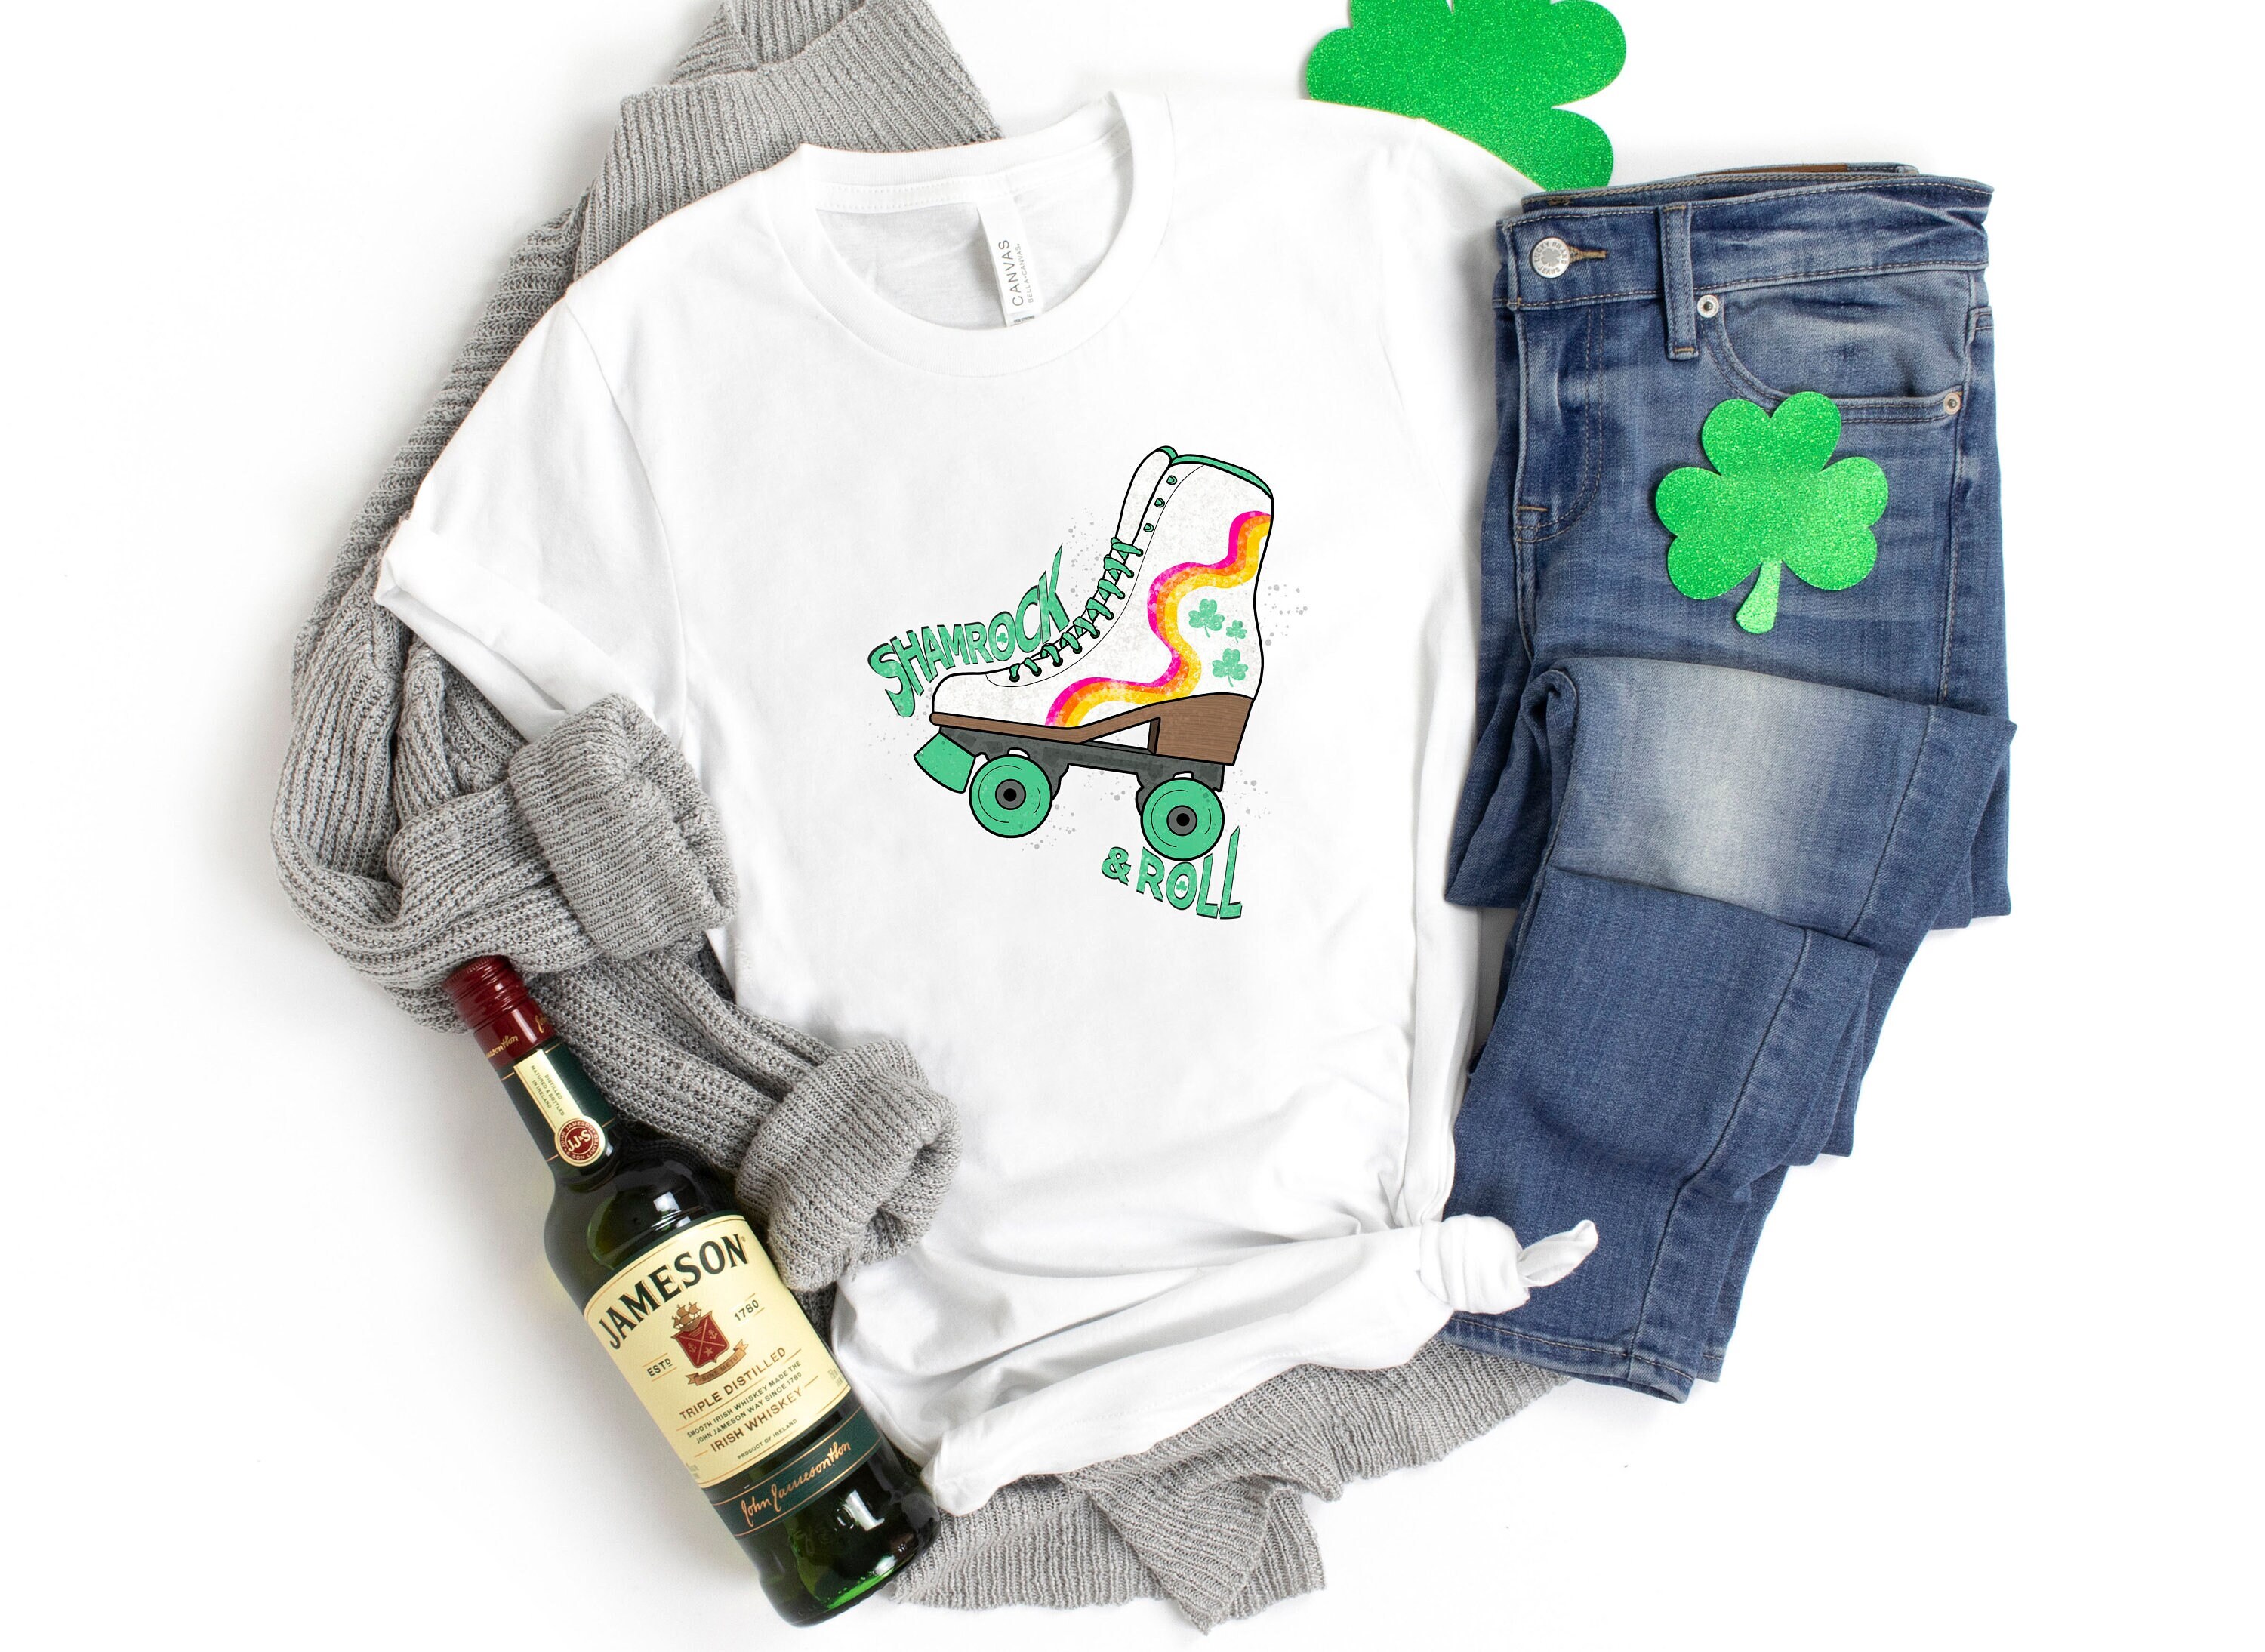 Discover Shamrock and Roll Shirt, St. Patrick's Day Shirt, Funny St. Patrick's Day Shirt